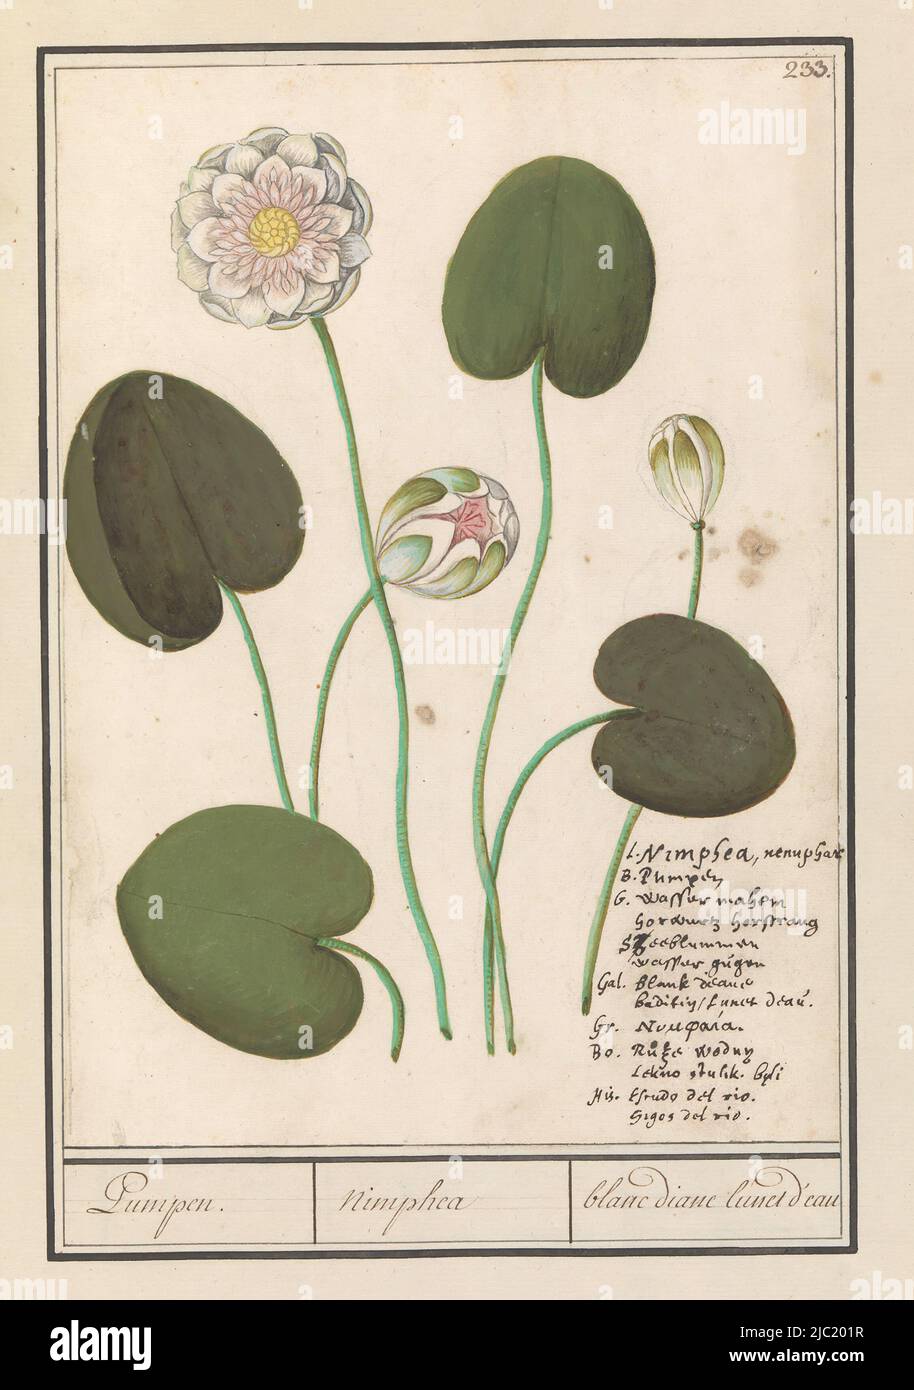 Water lily, probably the white water lily. Numbered upper right: 233. Bottom right the name in seven languages. Part of the third album of drawings of flowers and plants. Tenth of twelve albums with drawings of animals, birds and plants known around 1600, commissioned by Emperor Rudolf II. With notes in Dutch, Latin and French, White water lily (Nymphaea alba) Pumpen. / nimphea / blanc diane lunet d'eau, draughtsman: Anselmus Boëtius de Boodt, draughtsman: Elias Verhulst, draughtsman: Praag, draughtsman: Delft, 1596 - 1610, paper, brush, pen, h 259 mm × w 185 mm Stock Photo